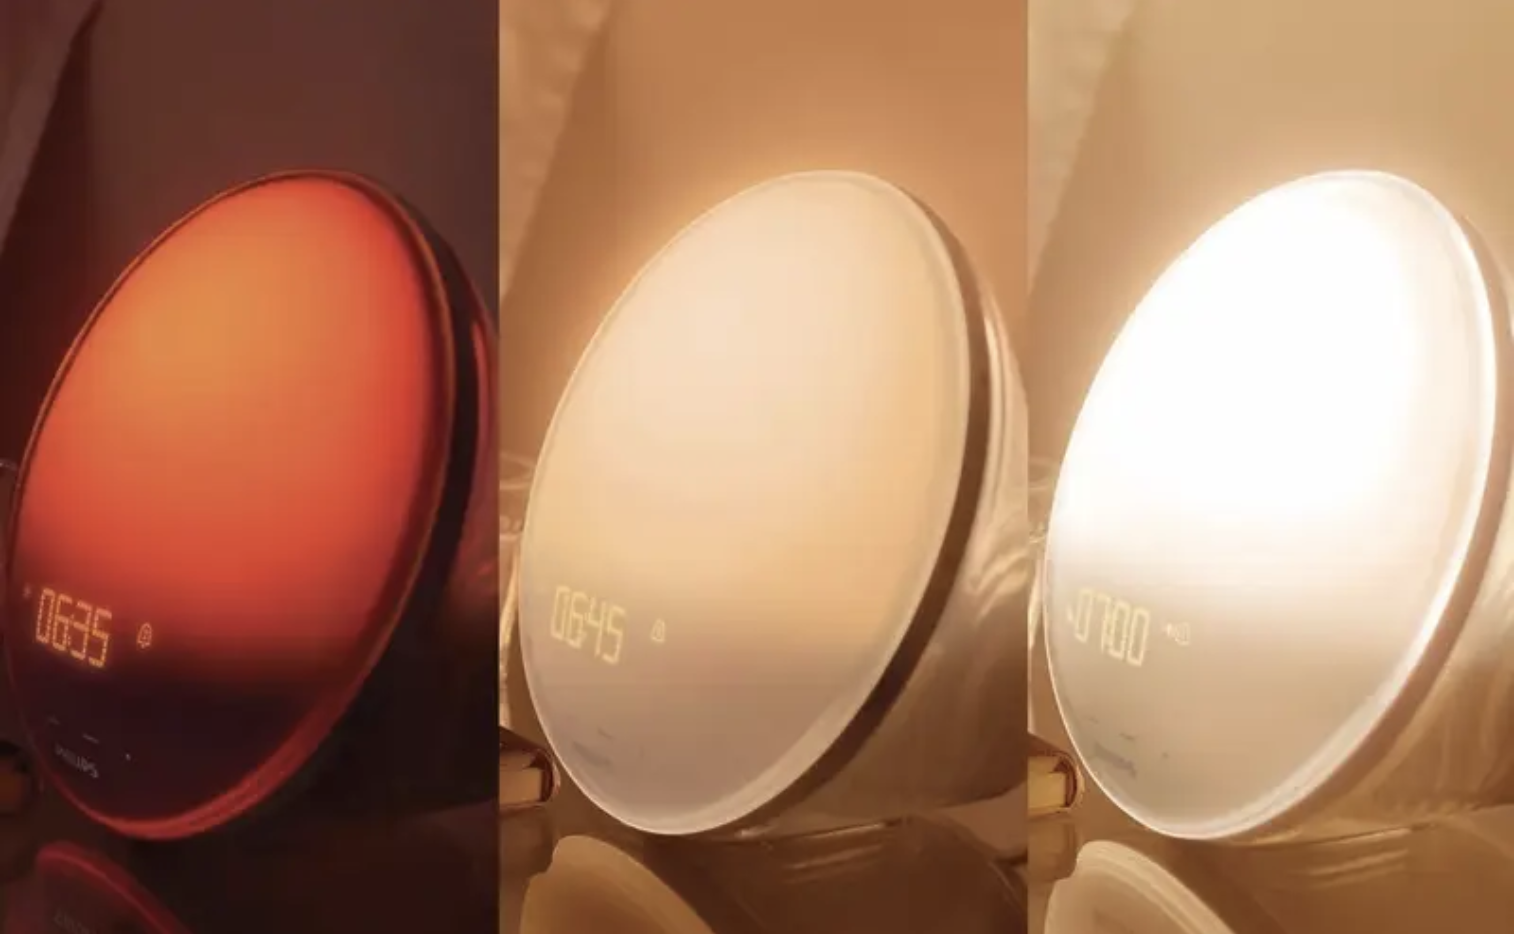 A sunrise alarm clock in three stages of lighting up from dim to brighter to brightest over the course of a half hour 